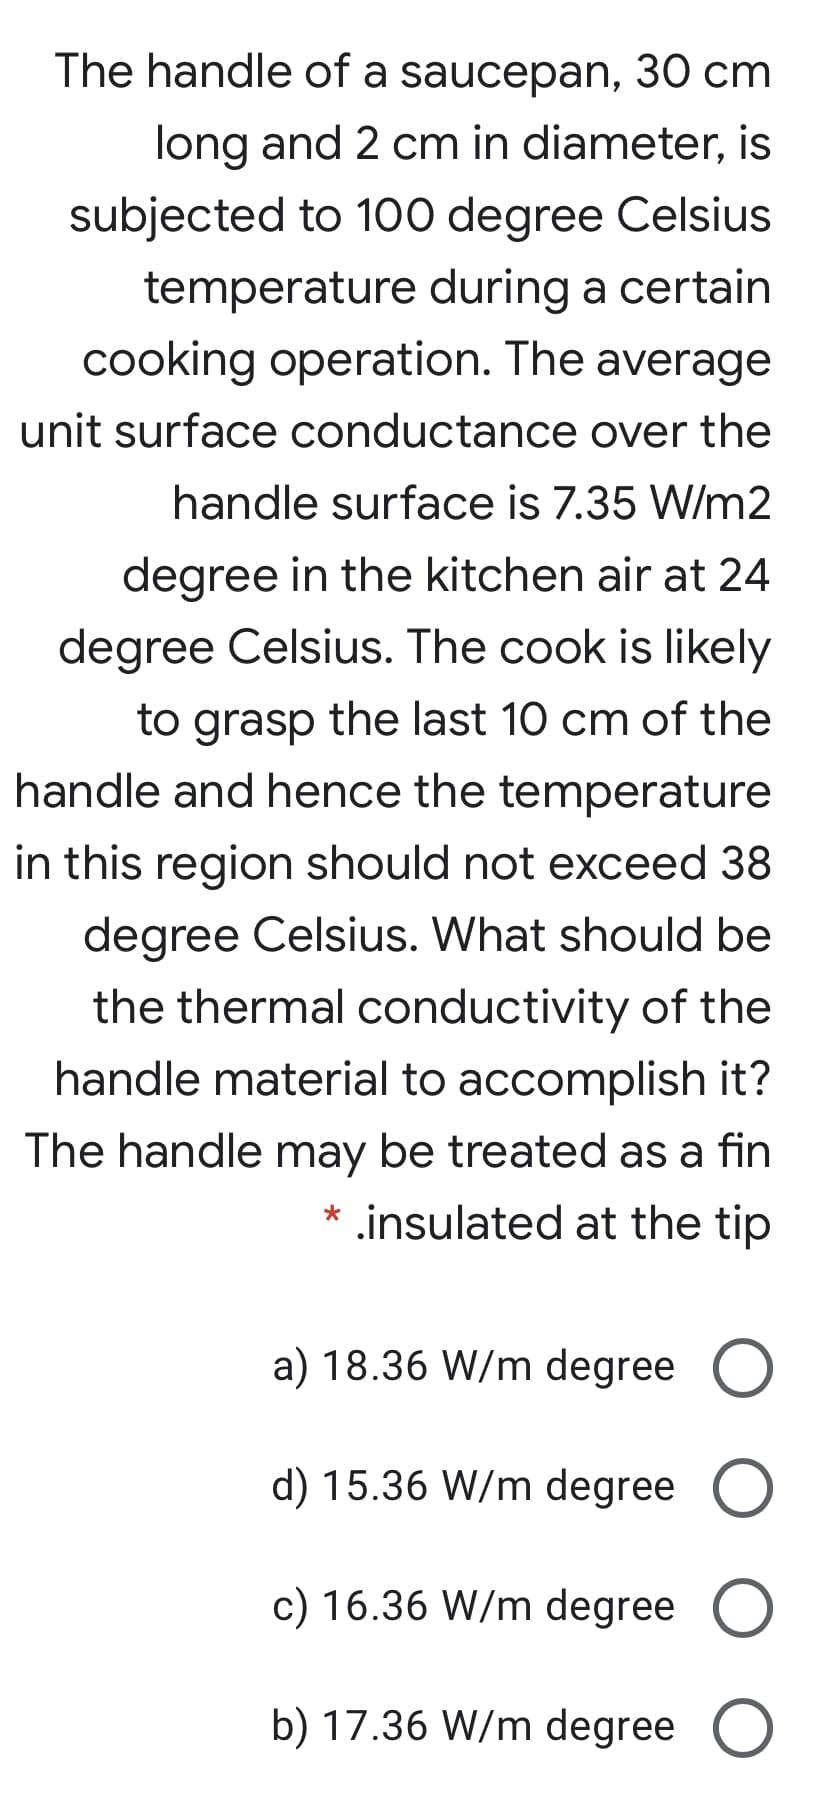 The handle of a saucepan, 30 cm
long and 2 cm in diameter, is
subjected to 100 degree Celsius
temperature during a certain
cooking operation. The average
unit surface conductance over the
handle surface is 7.35 W/m2
degree in the kitchen air at 24
degree Celsius. The cook is likely
to grasp the last 10 cm of the
handle and hence the temperature
in this region should not exceed 38
degree Celsius. What should be
the thermal conductivity of the
handle material to accomplish it?
The handle may be treated as a fin
* .insulated at the tip
